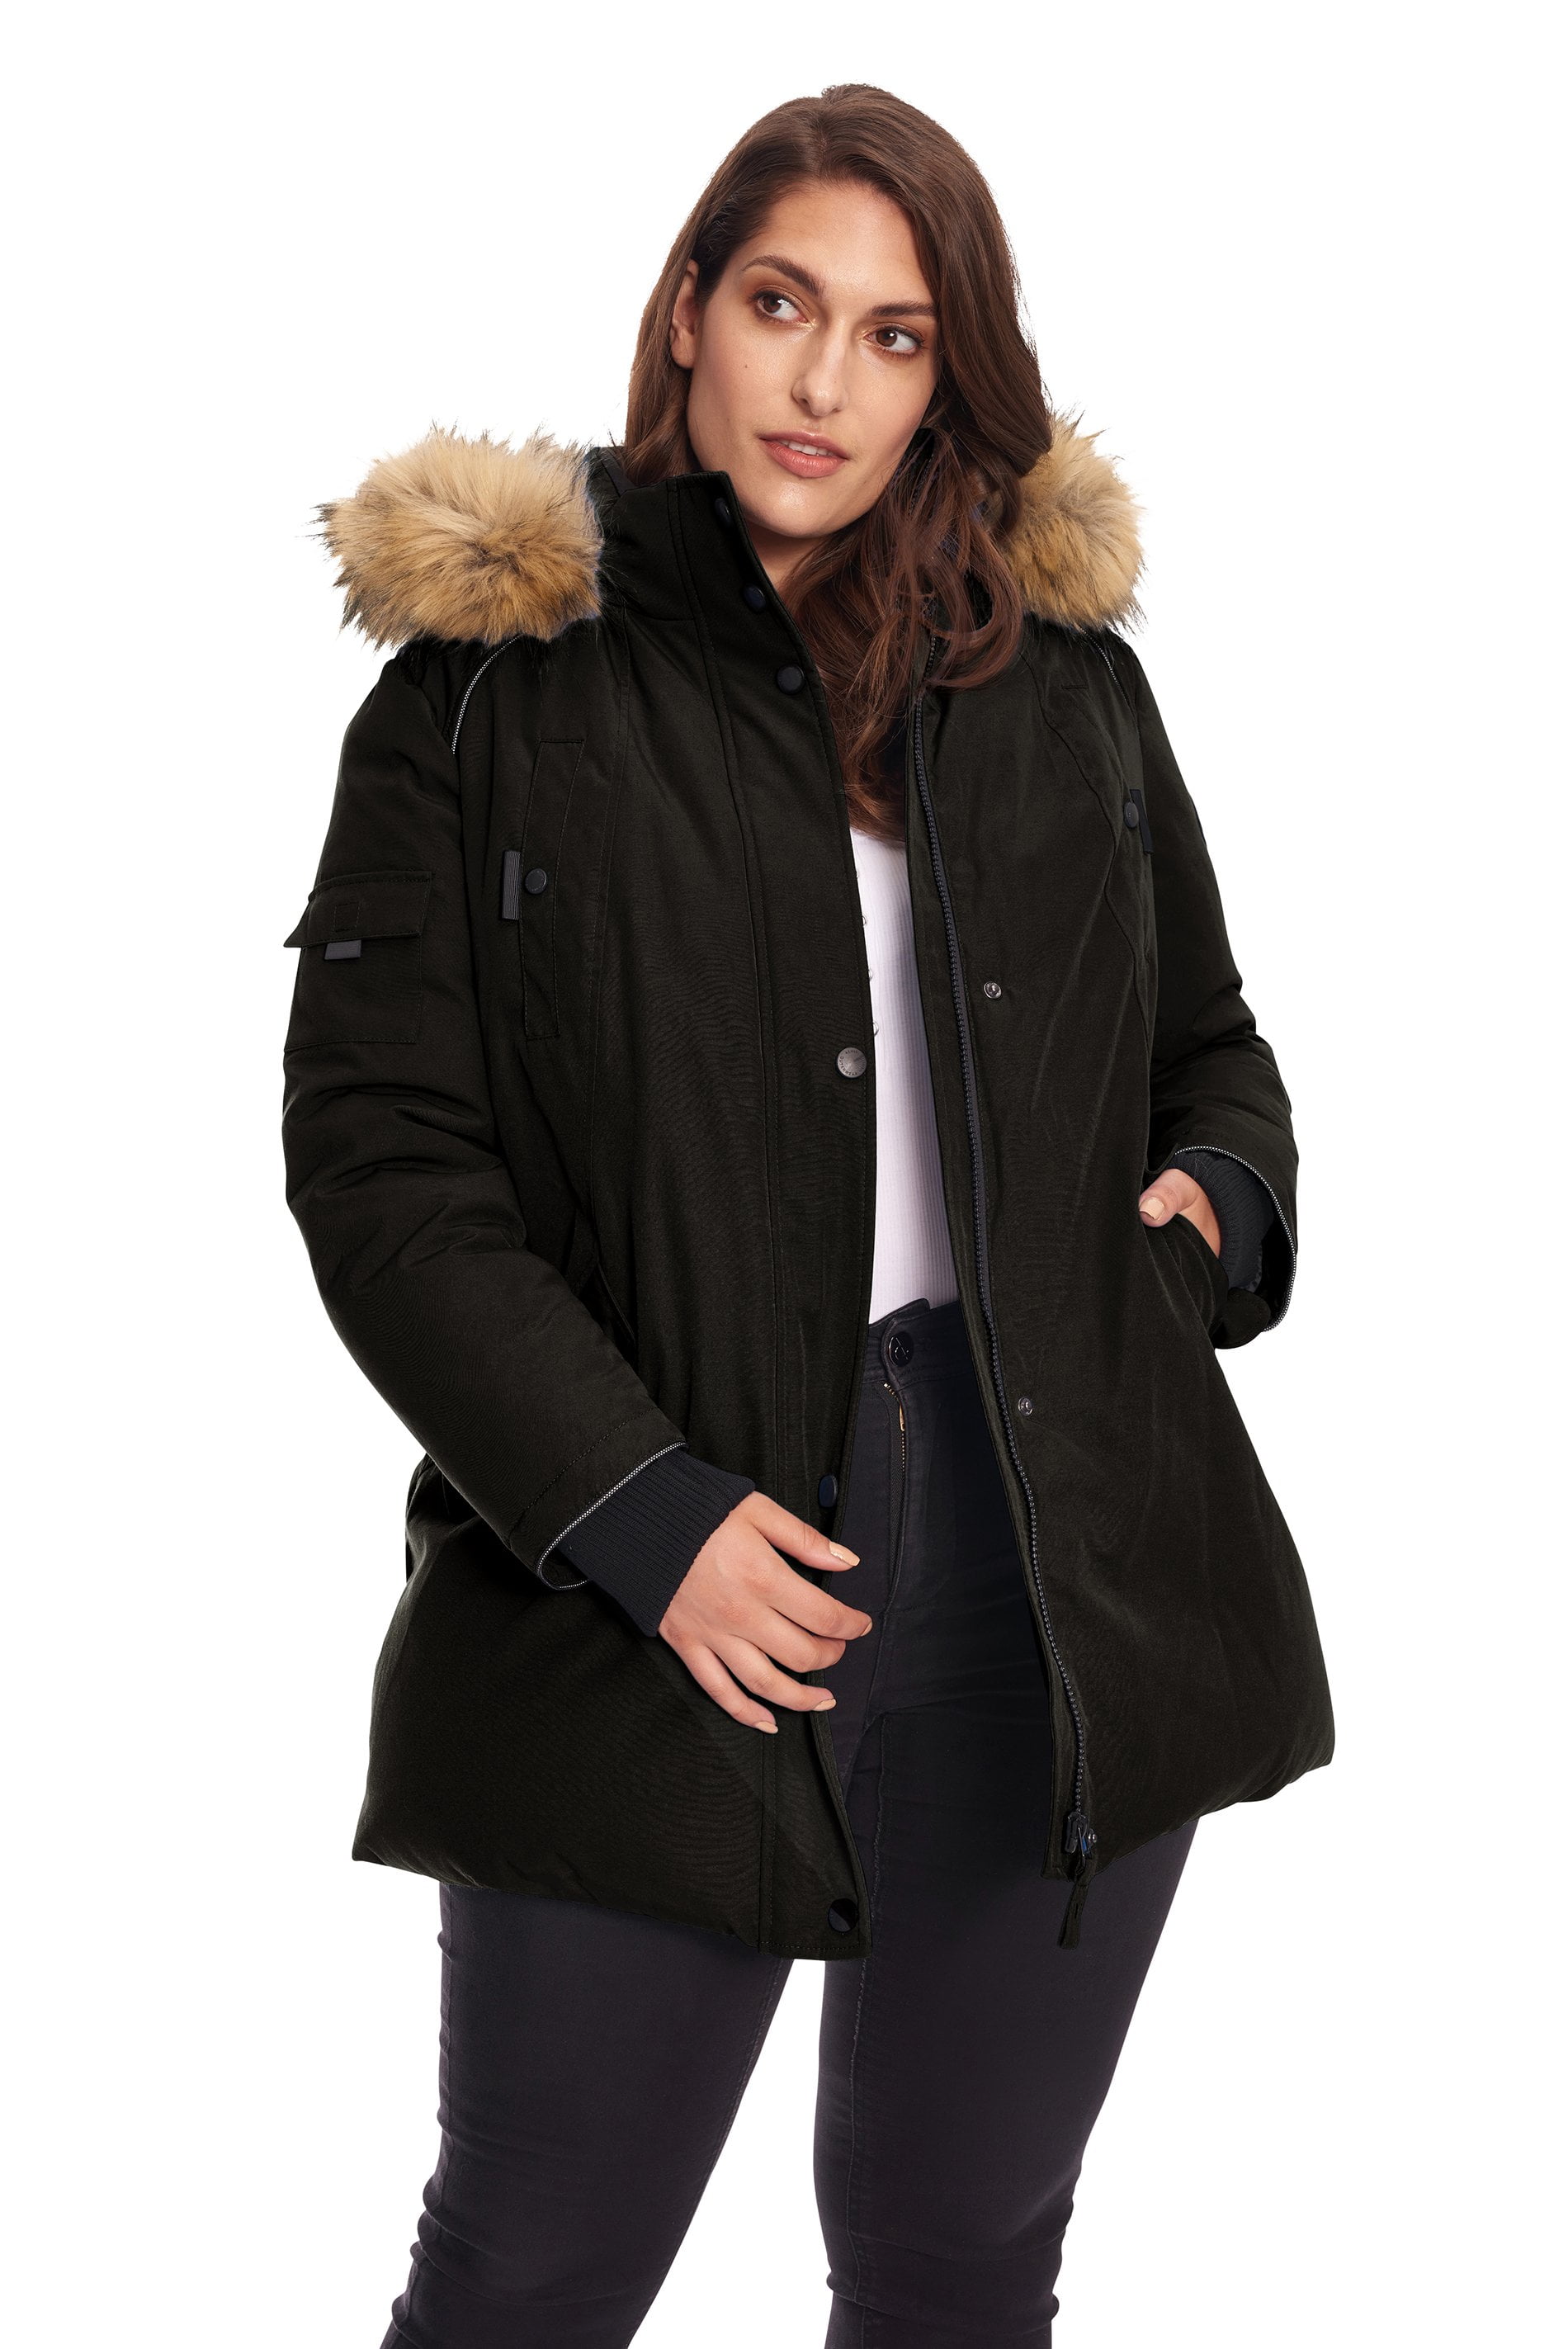 LAWOR Plus Size Coats Winter Clearance Women Coats Thickening Cotton Coat  Large Size Women Clothing Clothes Outerwear Fall Savings Z